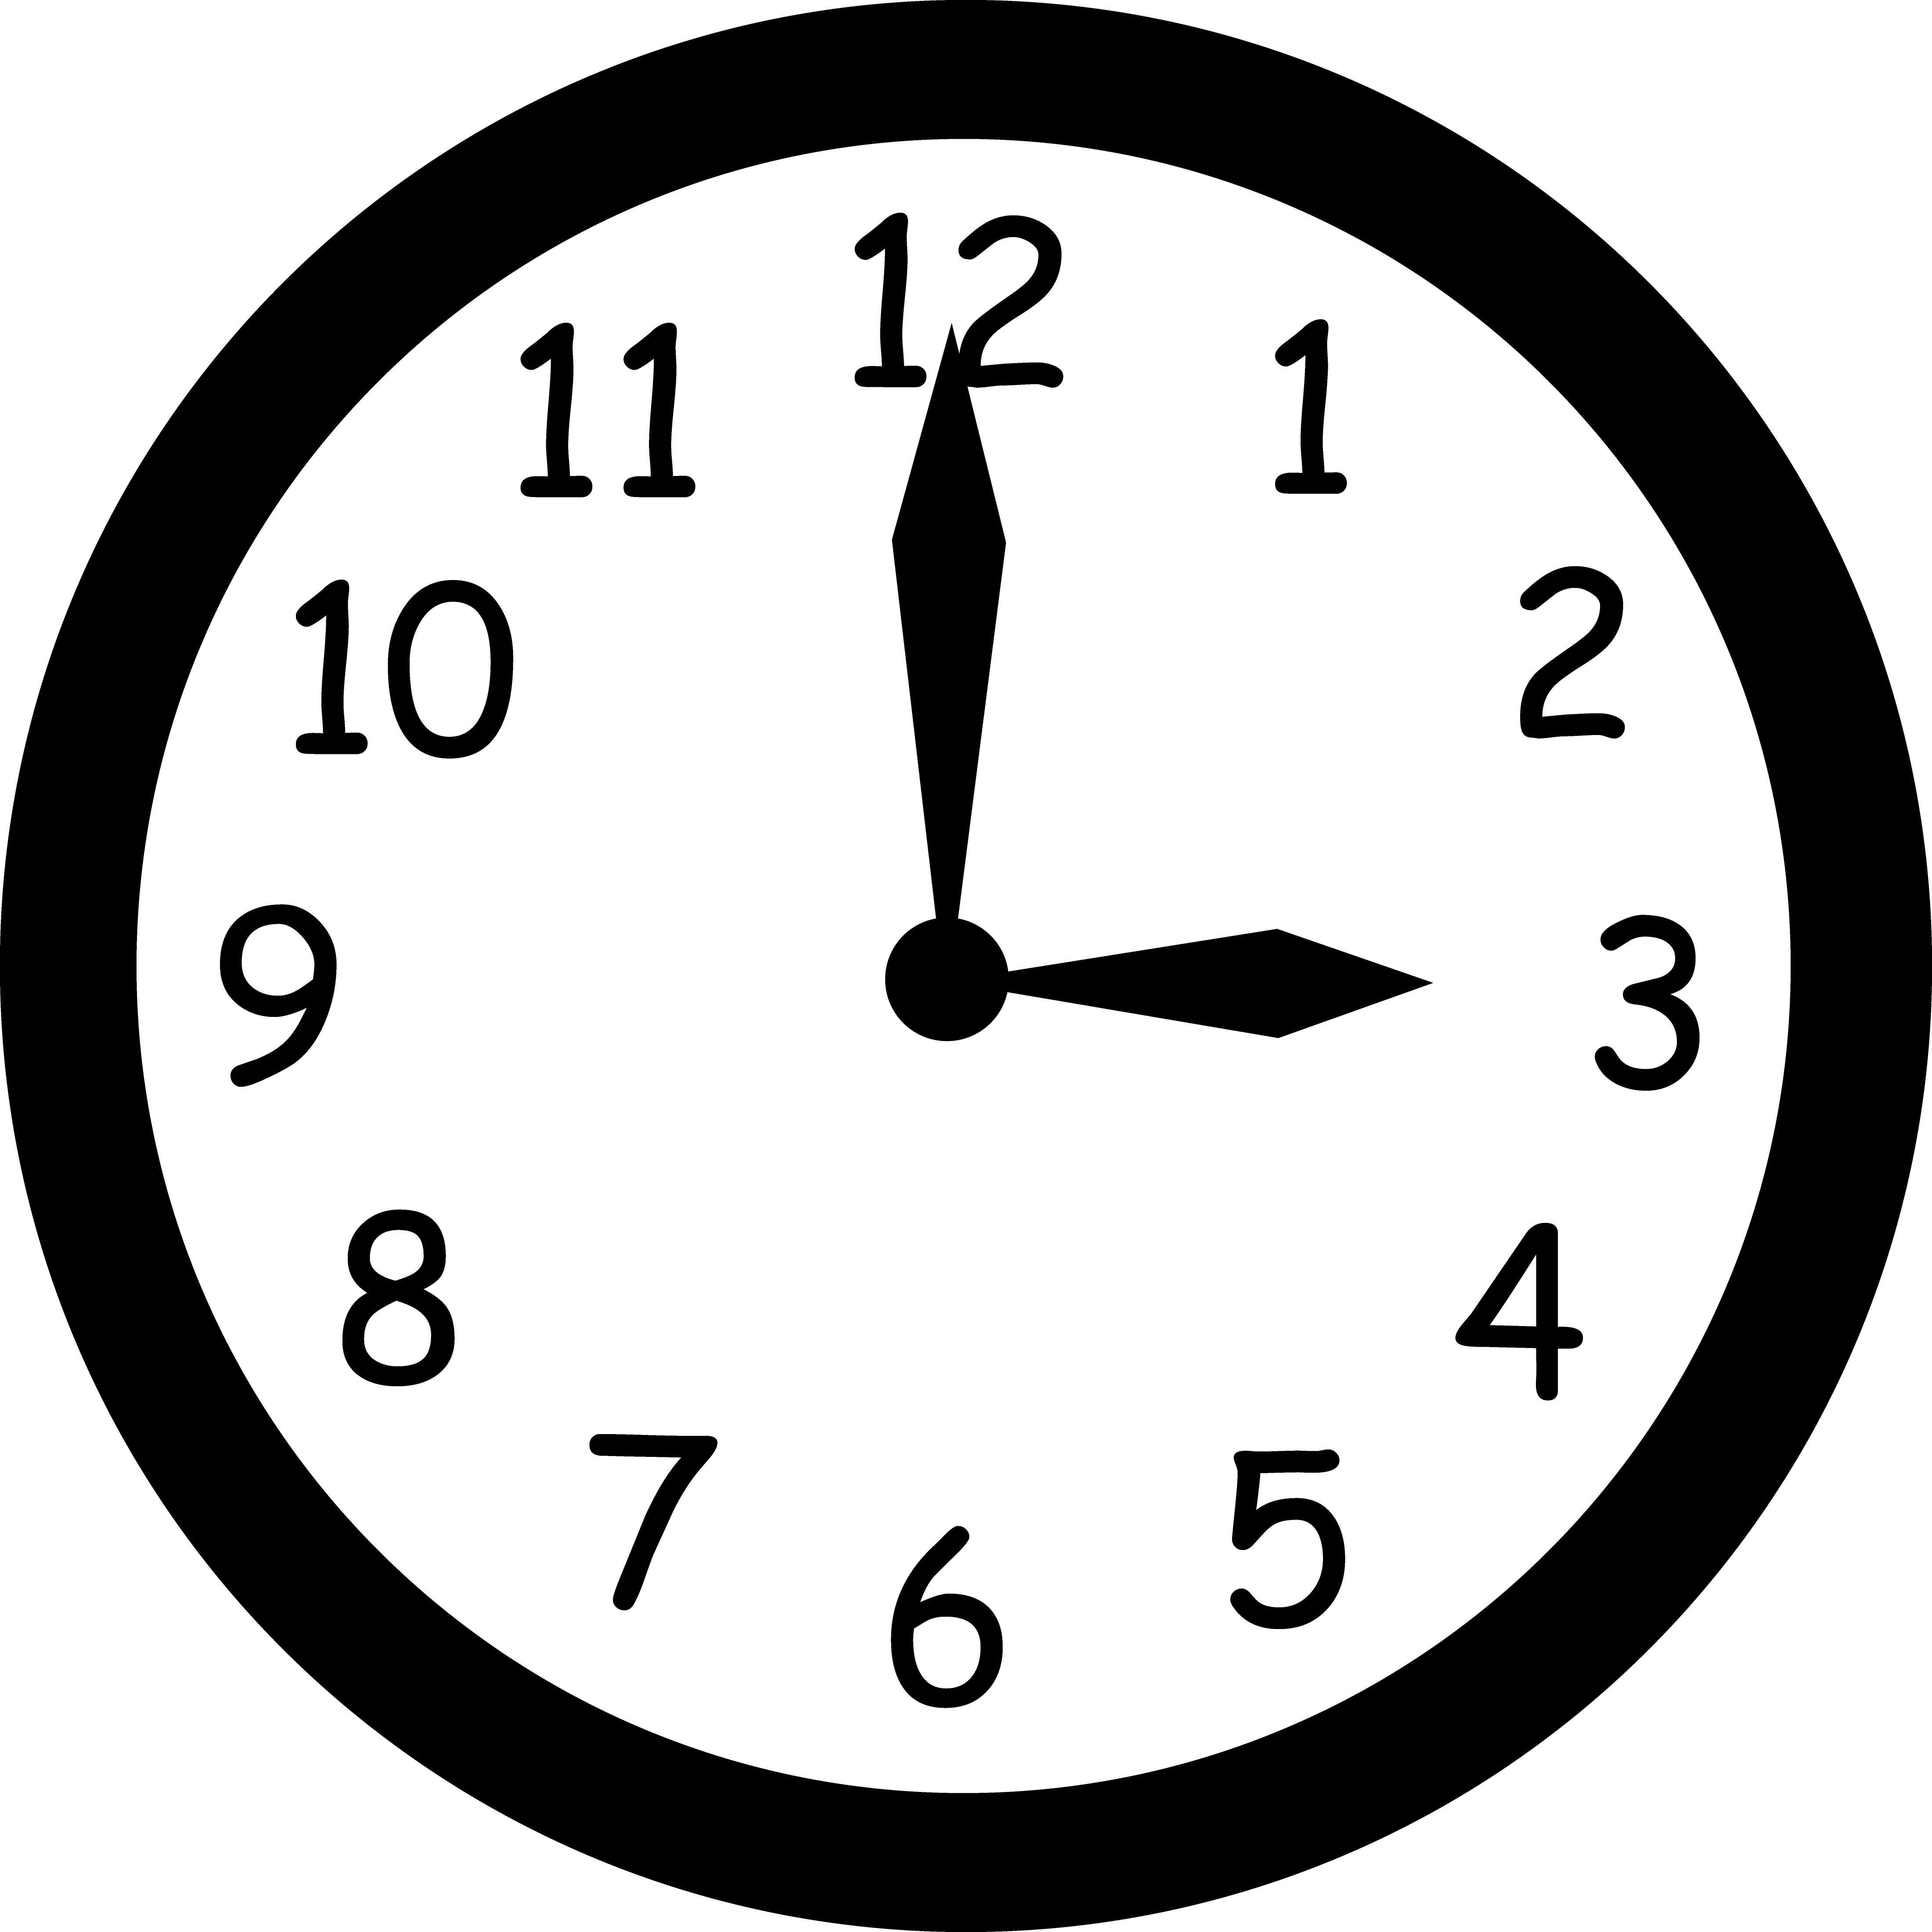 Clock Clip Art Without Hands | Clipart Panda - Free Clipart Images